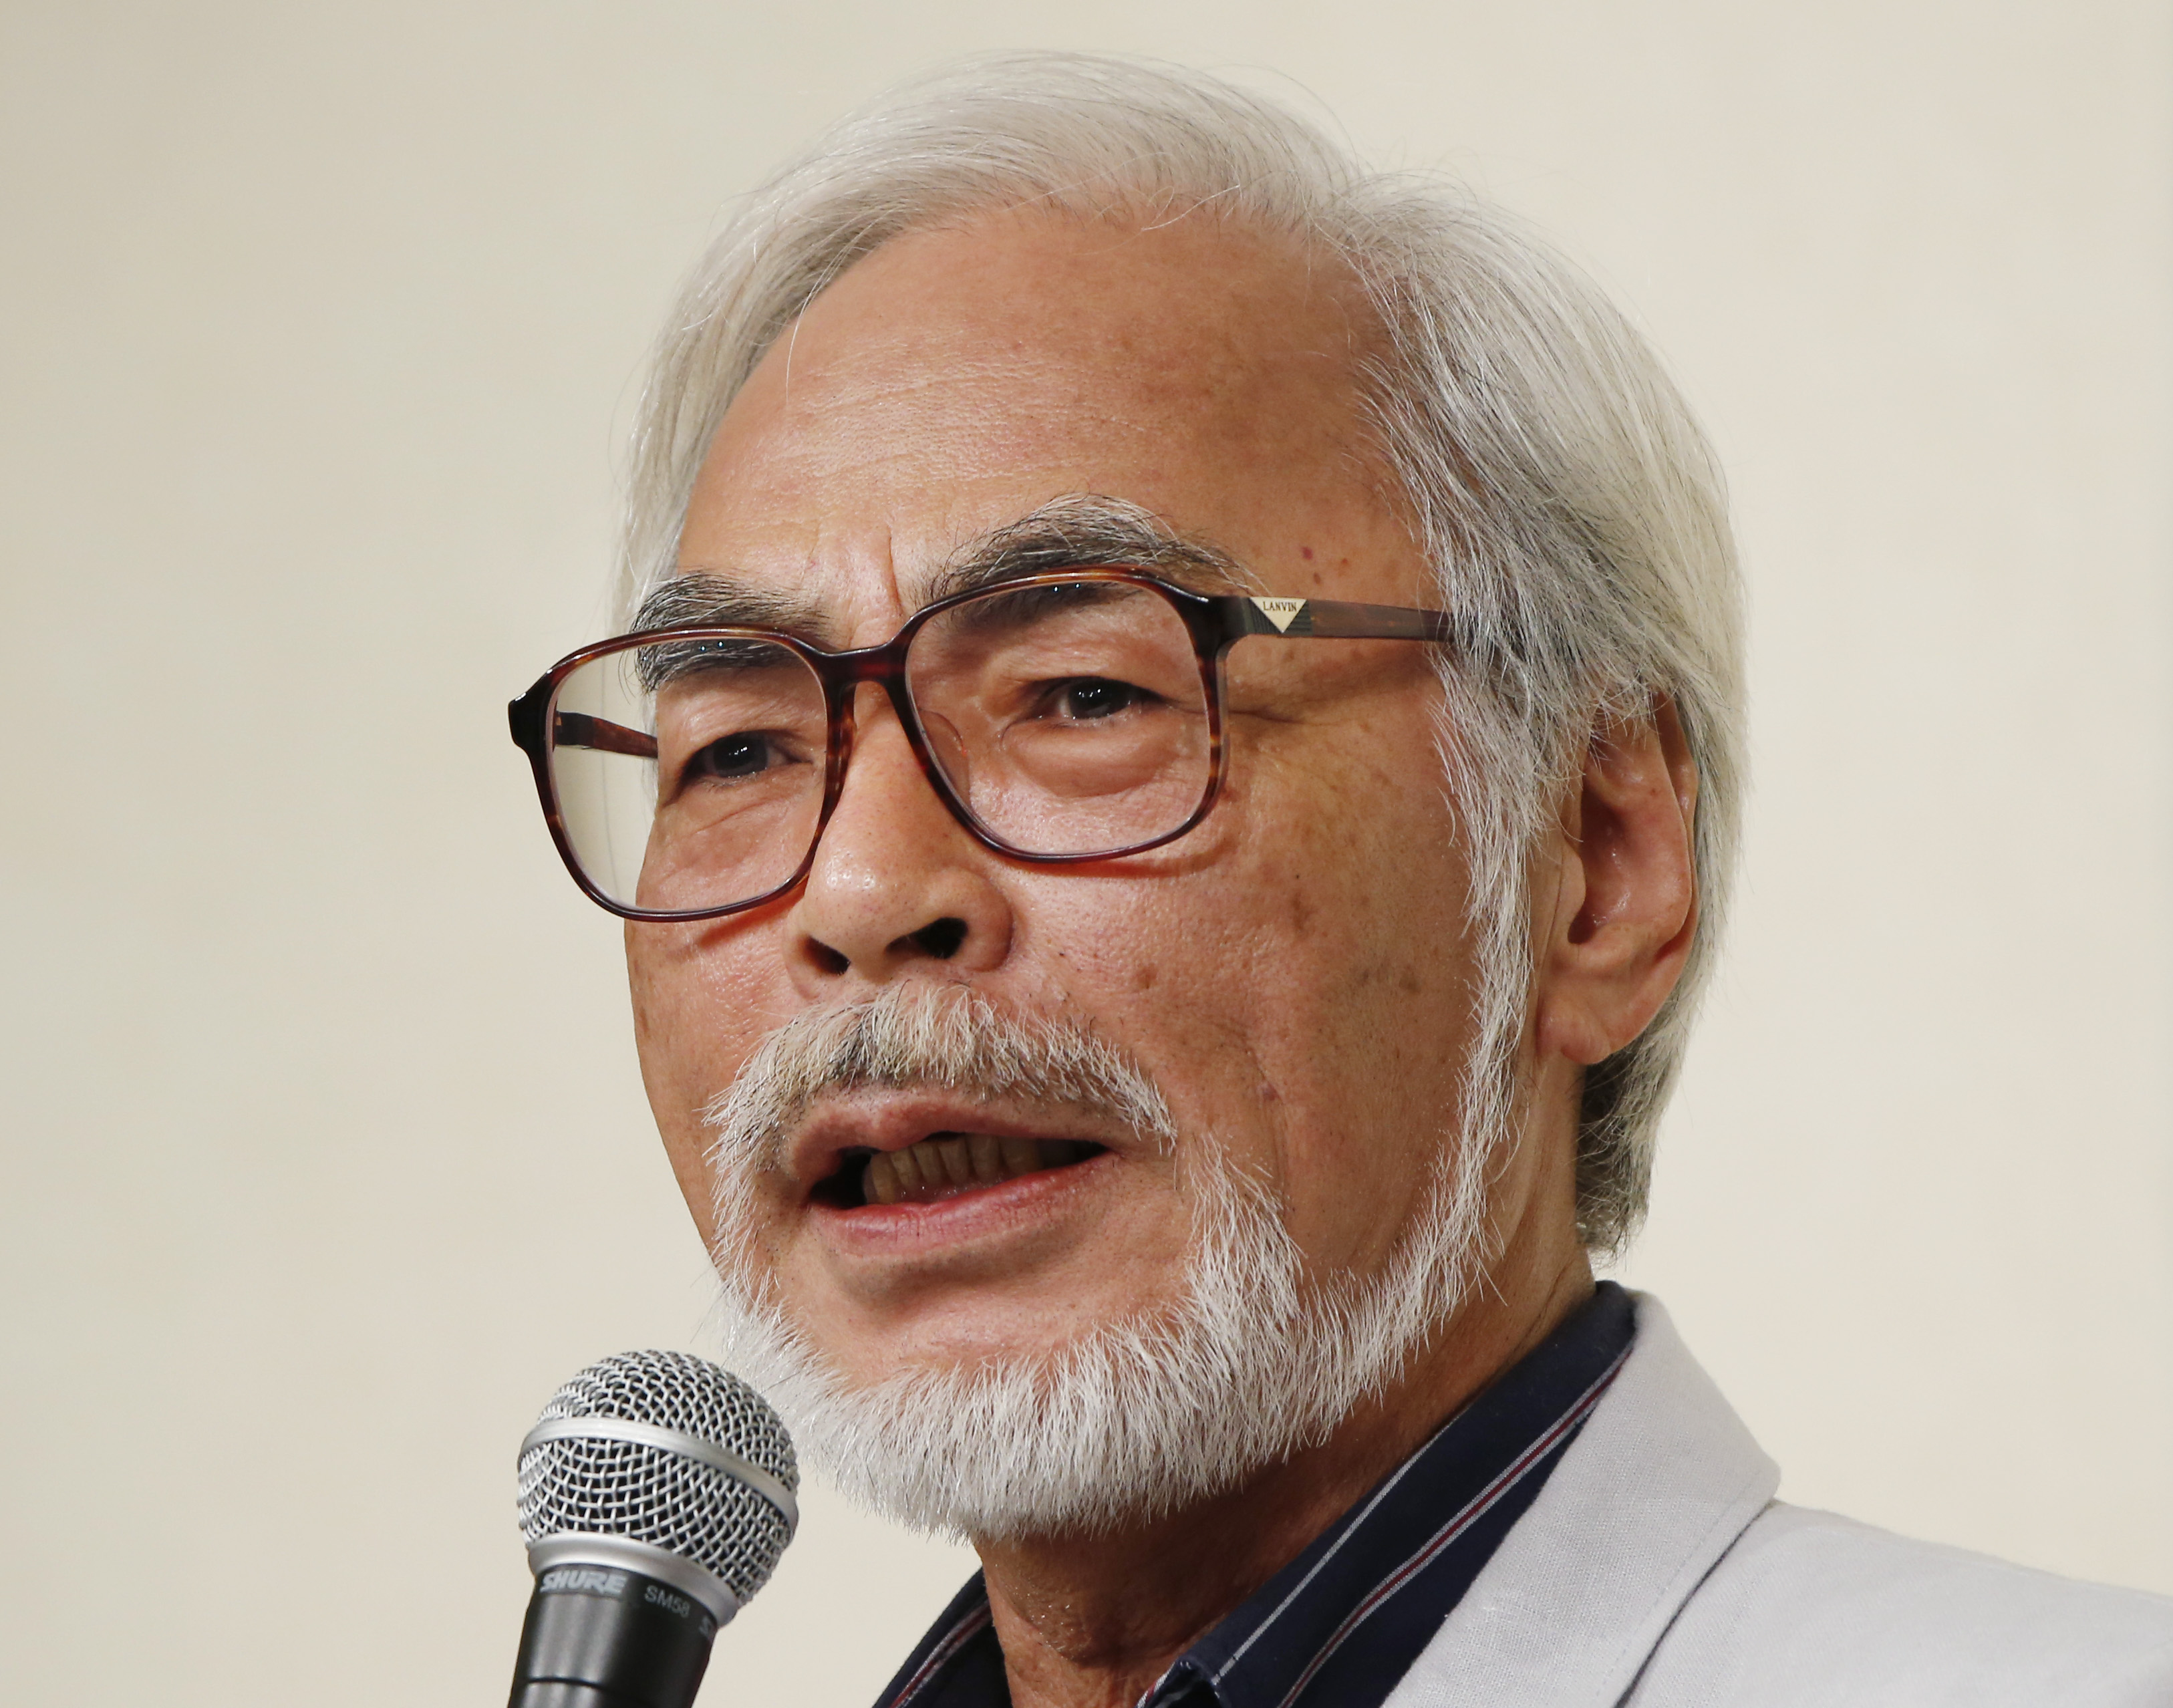 Animated and frustrated: Director Hayao Miyazaki on Monday expressed concern about the current direction that Prime Minister Shinzo Abe's government is taking the country. | KYODO / AP / KOJI SASAHARA